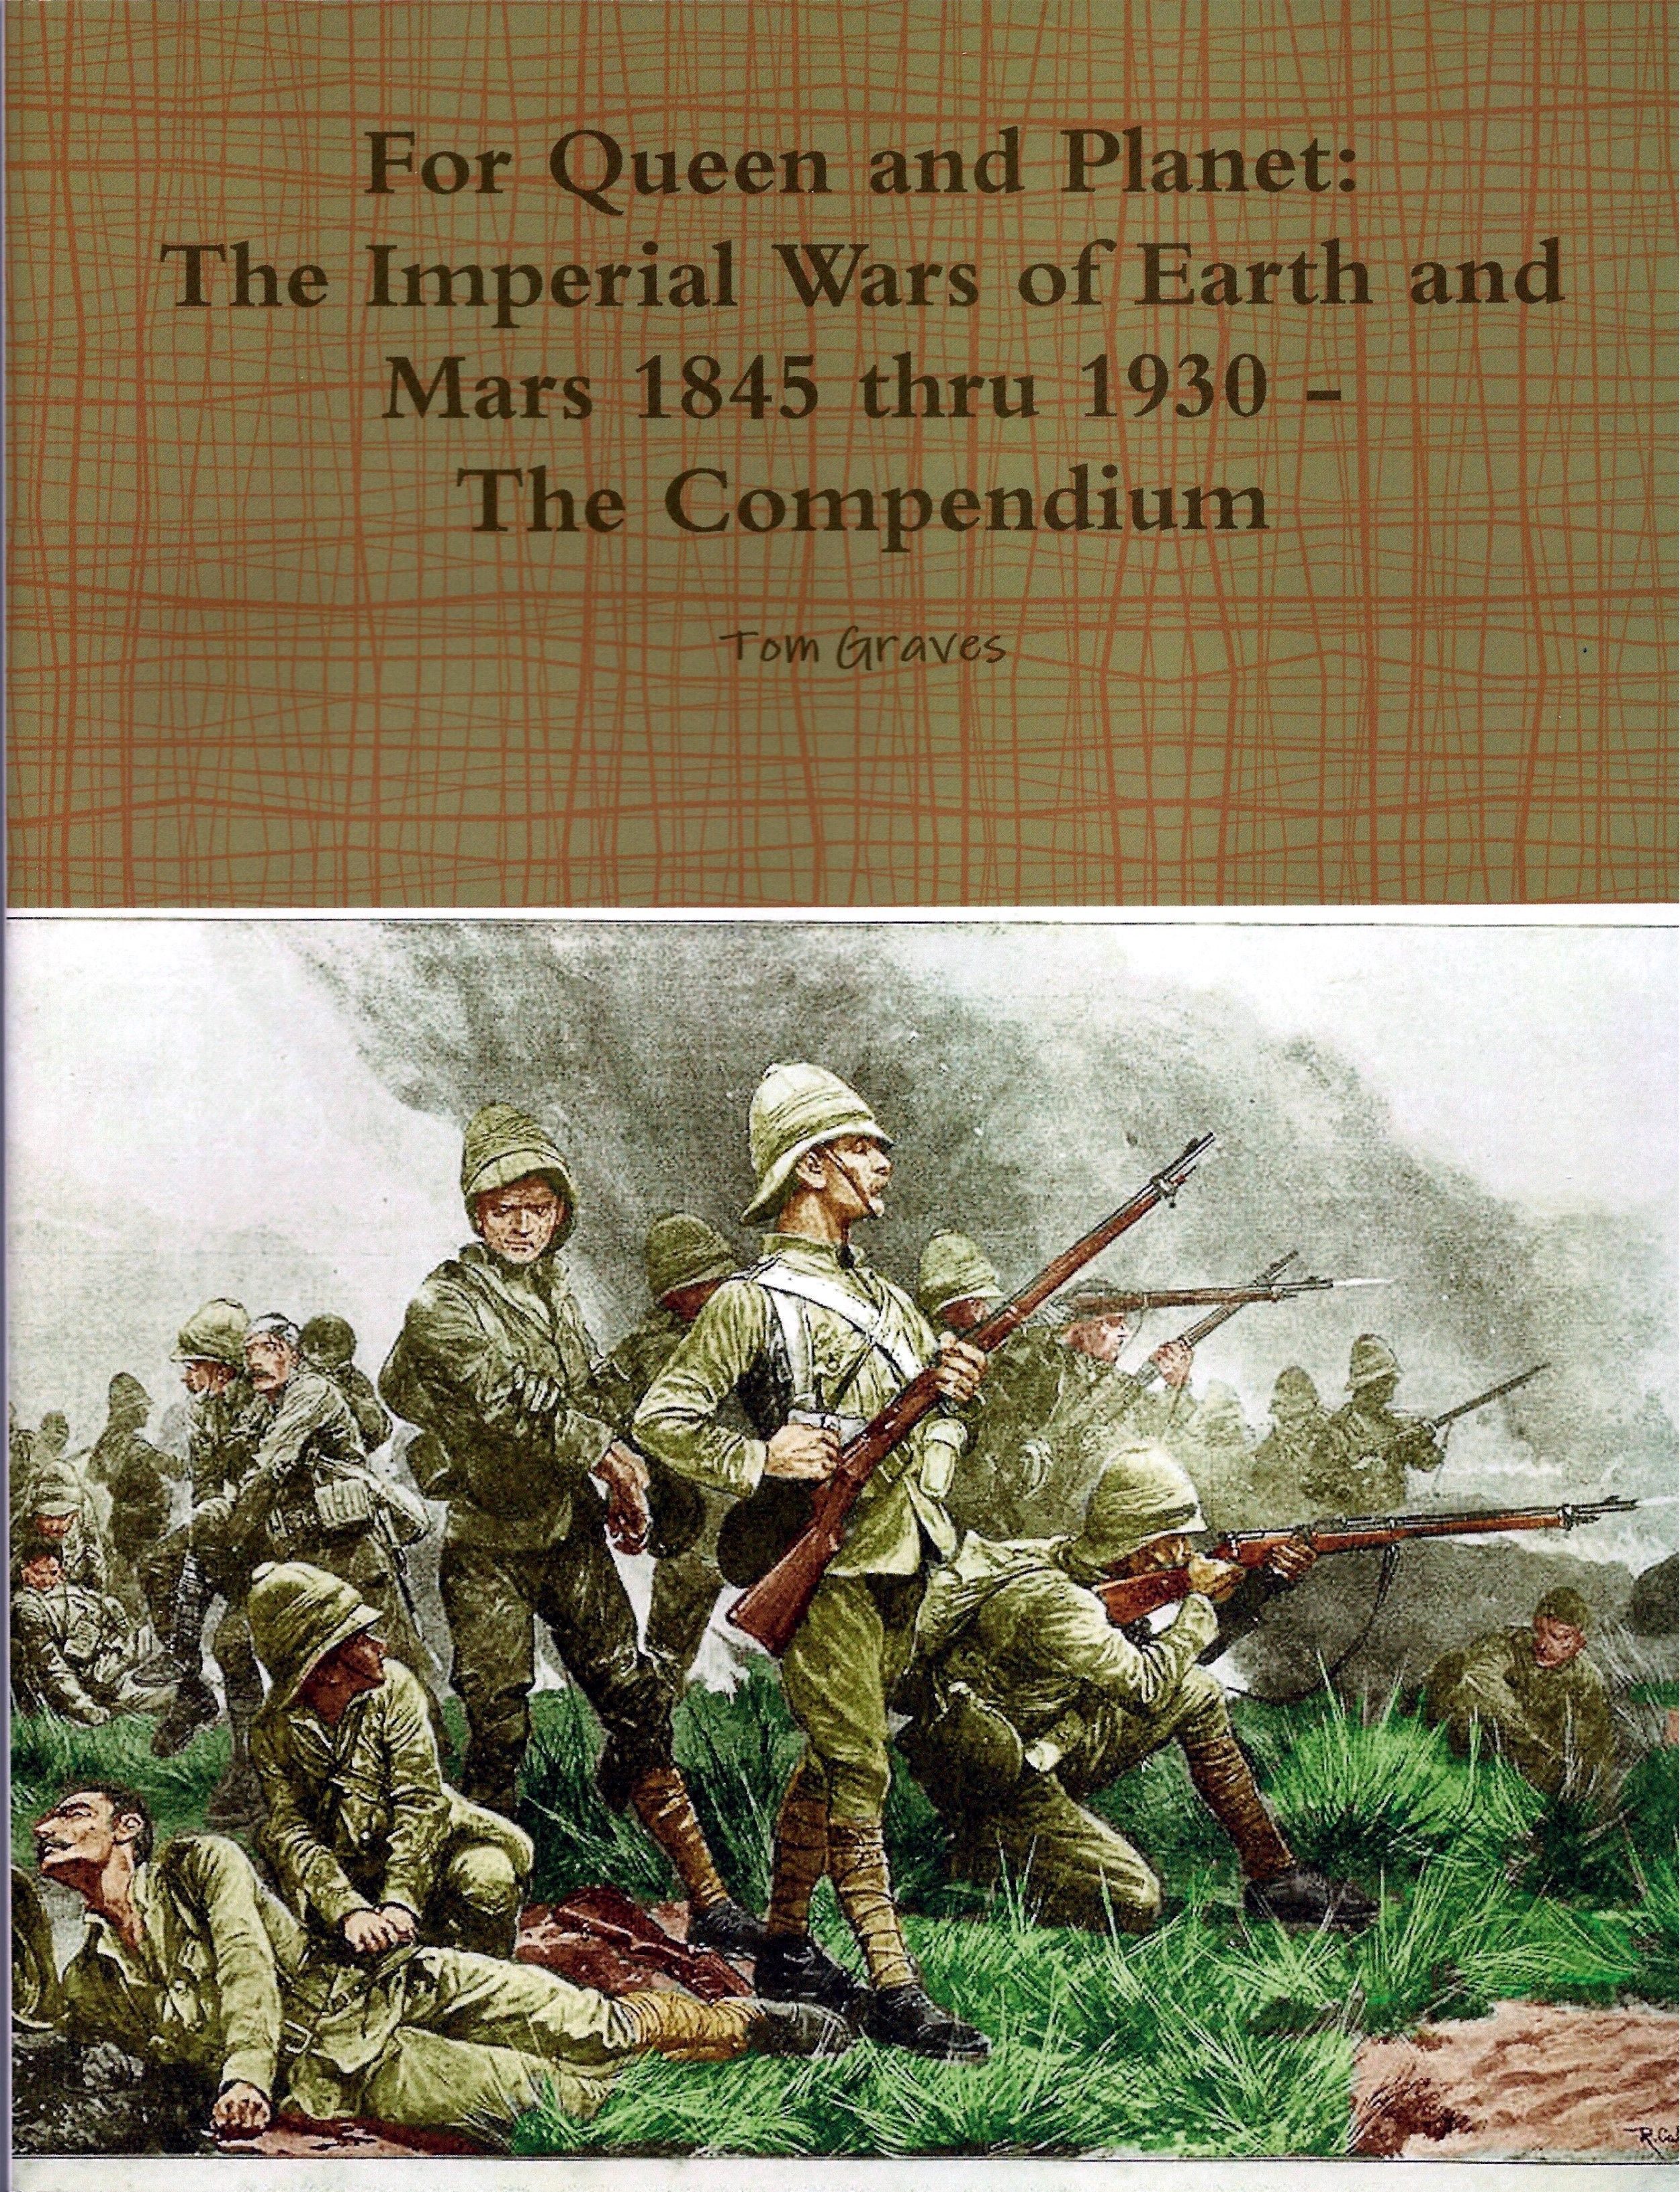 For Queen and Planet: The Imperial Wars of Earth and Mars 1845 thru 1930 – The Compendium